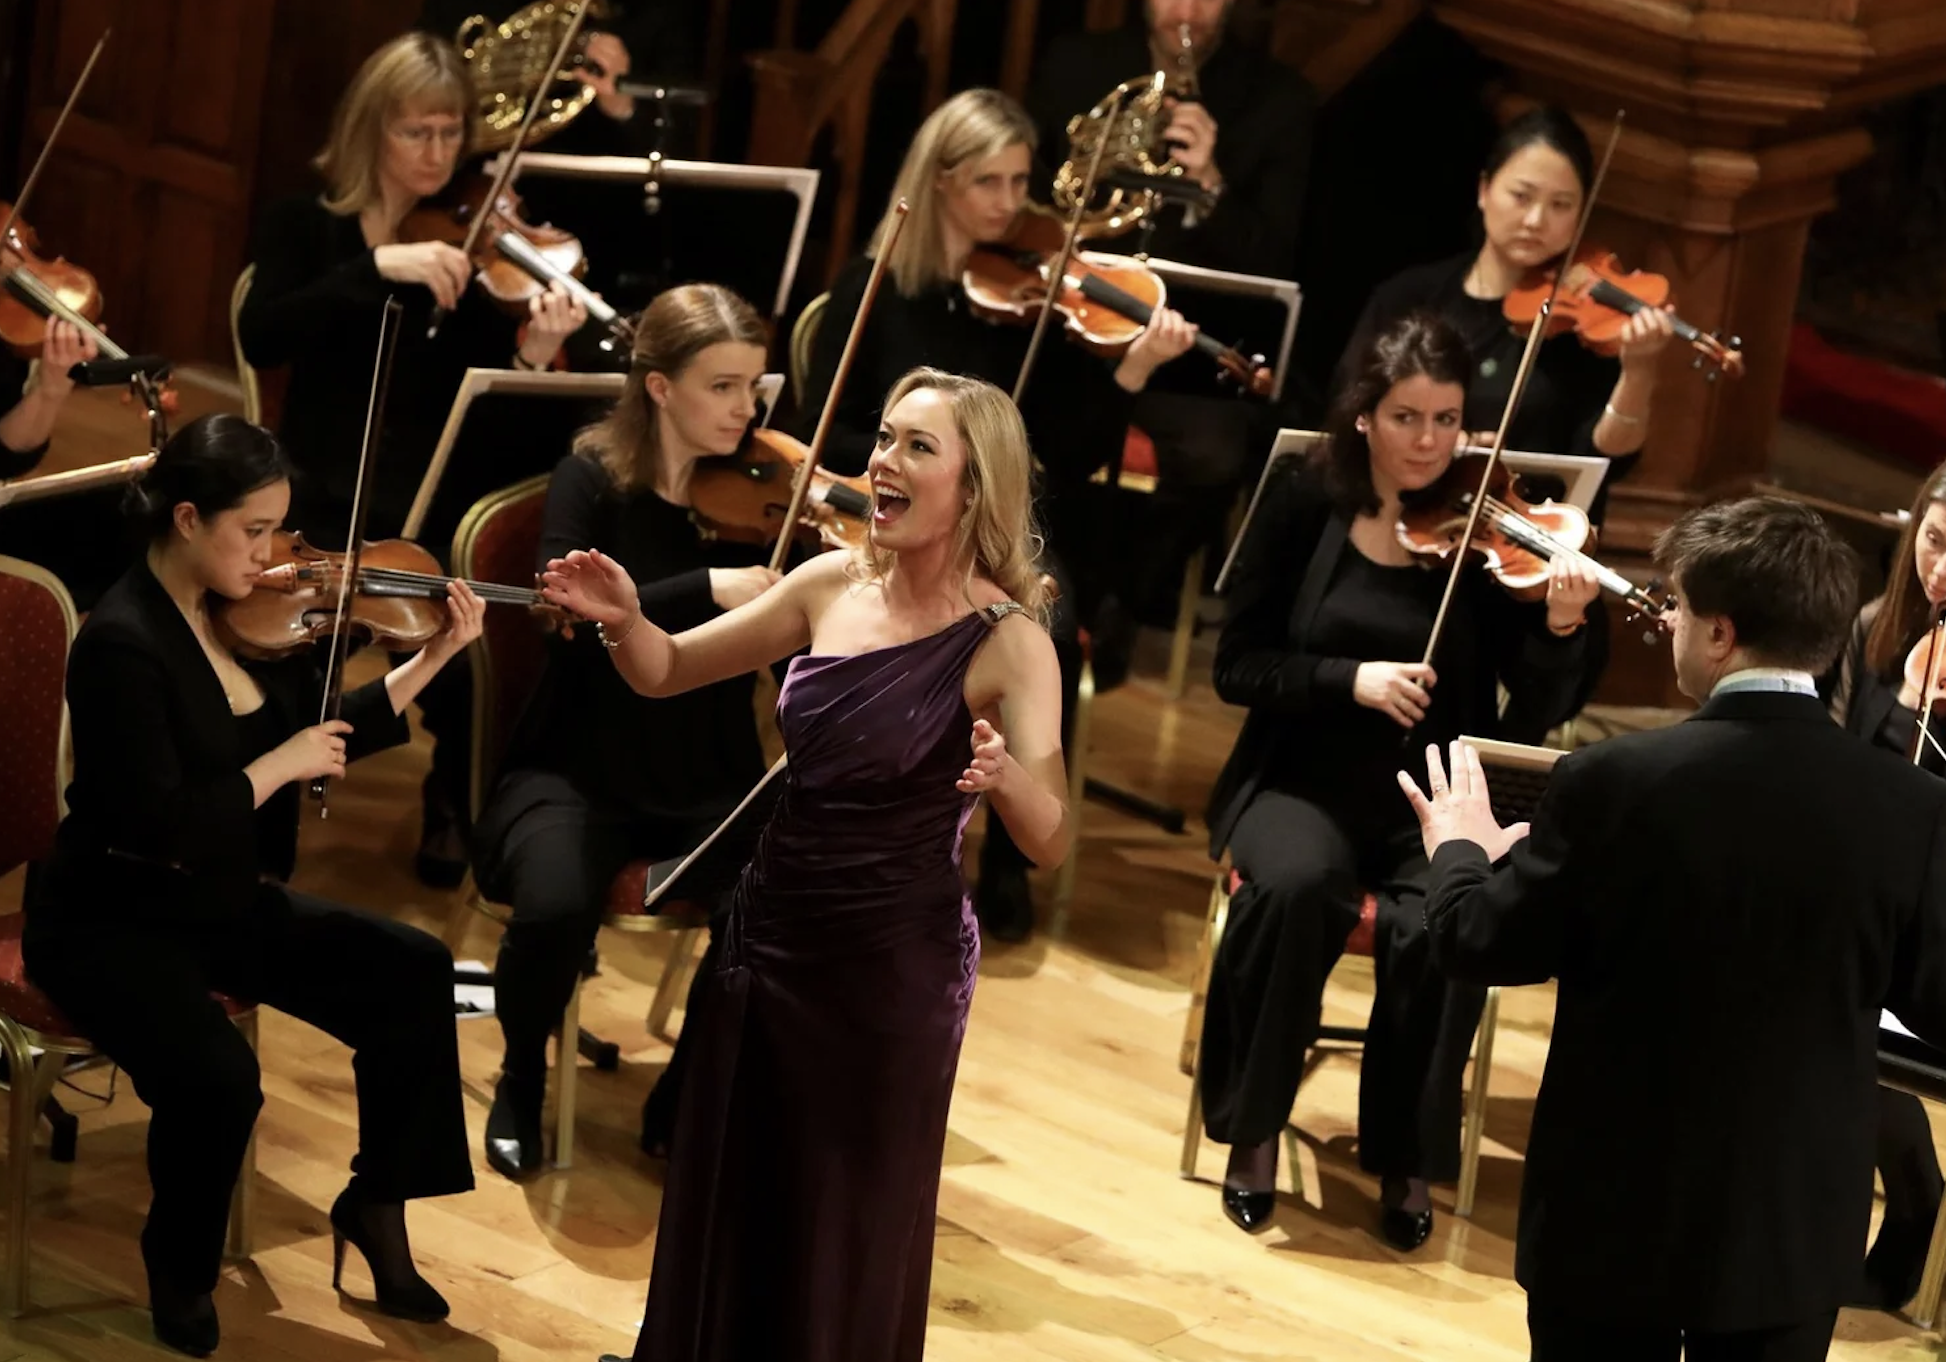 NCH Bursaries for Emerging Composers and Classical Singers Now Open for Applications